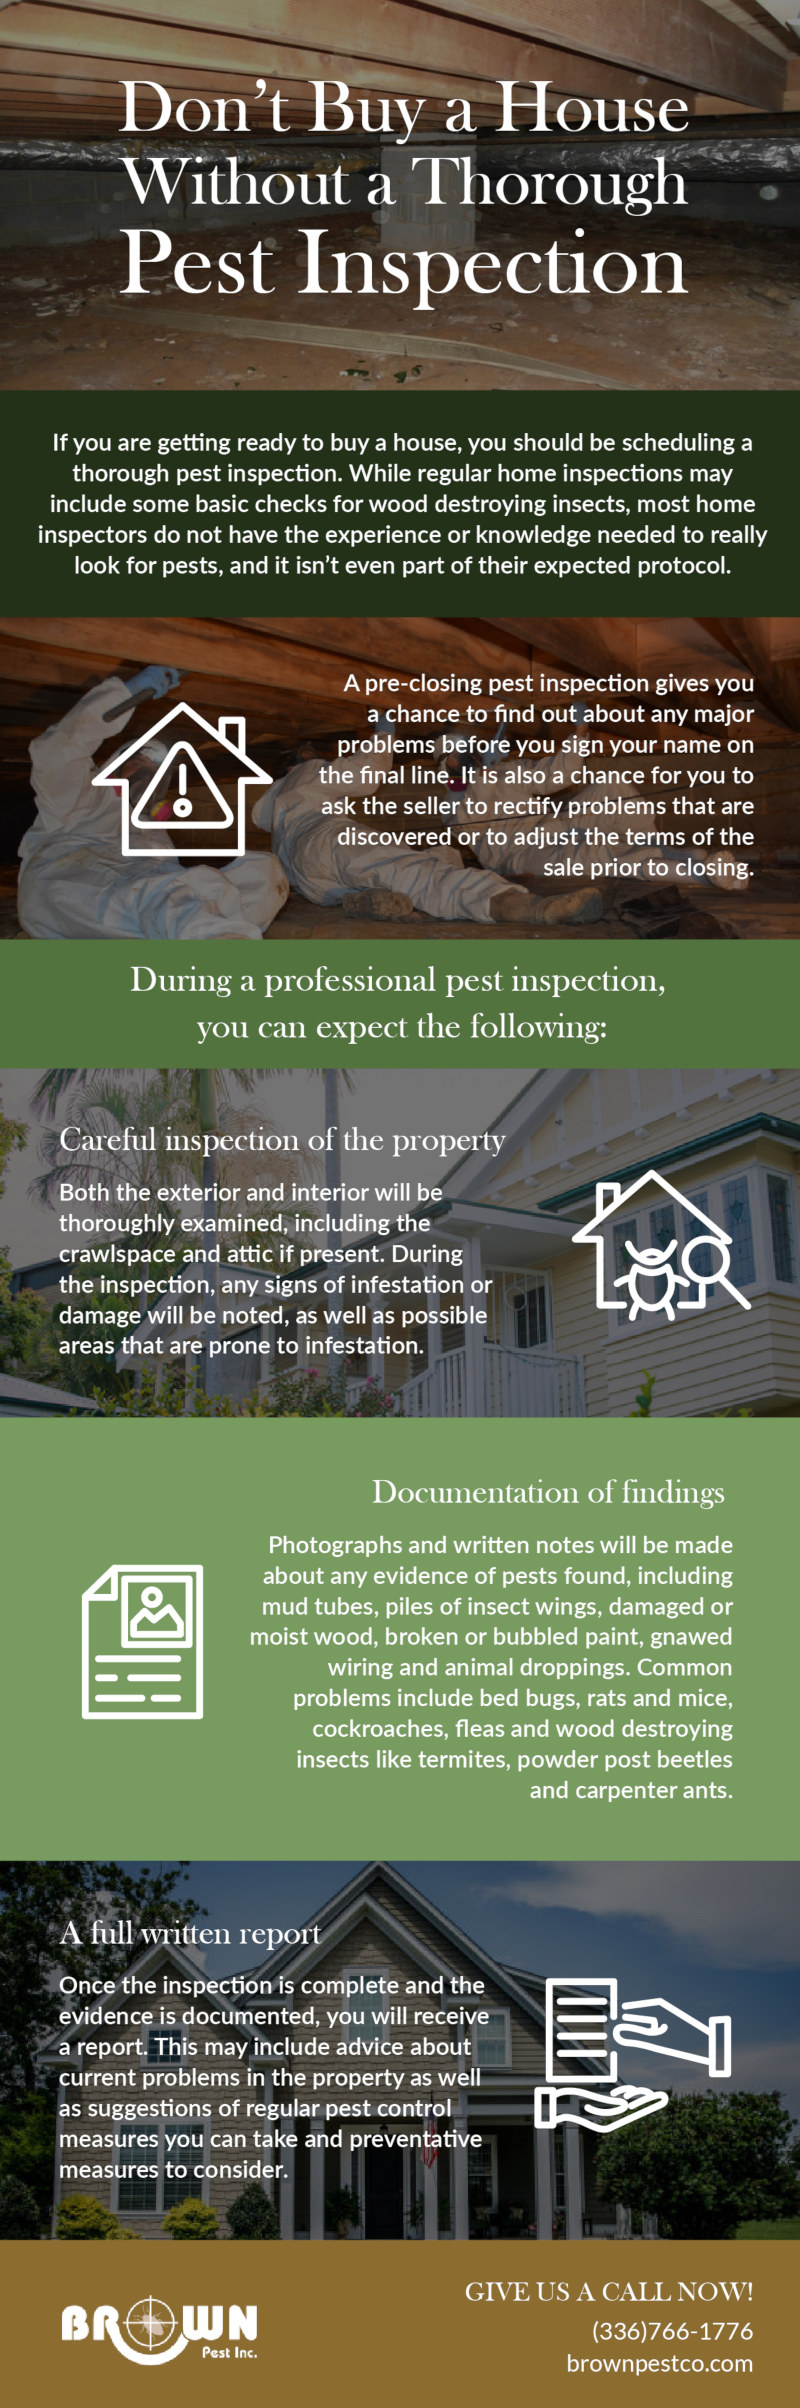 Don’t Buy a House Without a Thorough Pest Inspection [infographic]